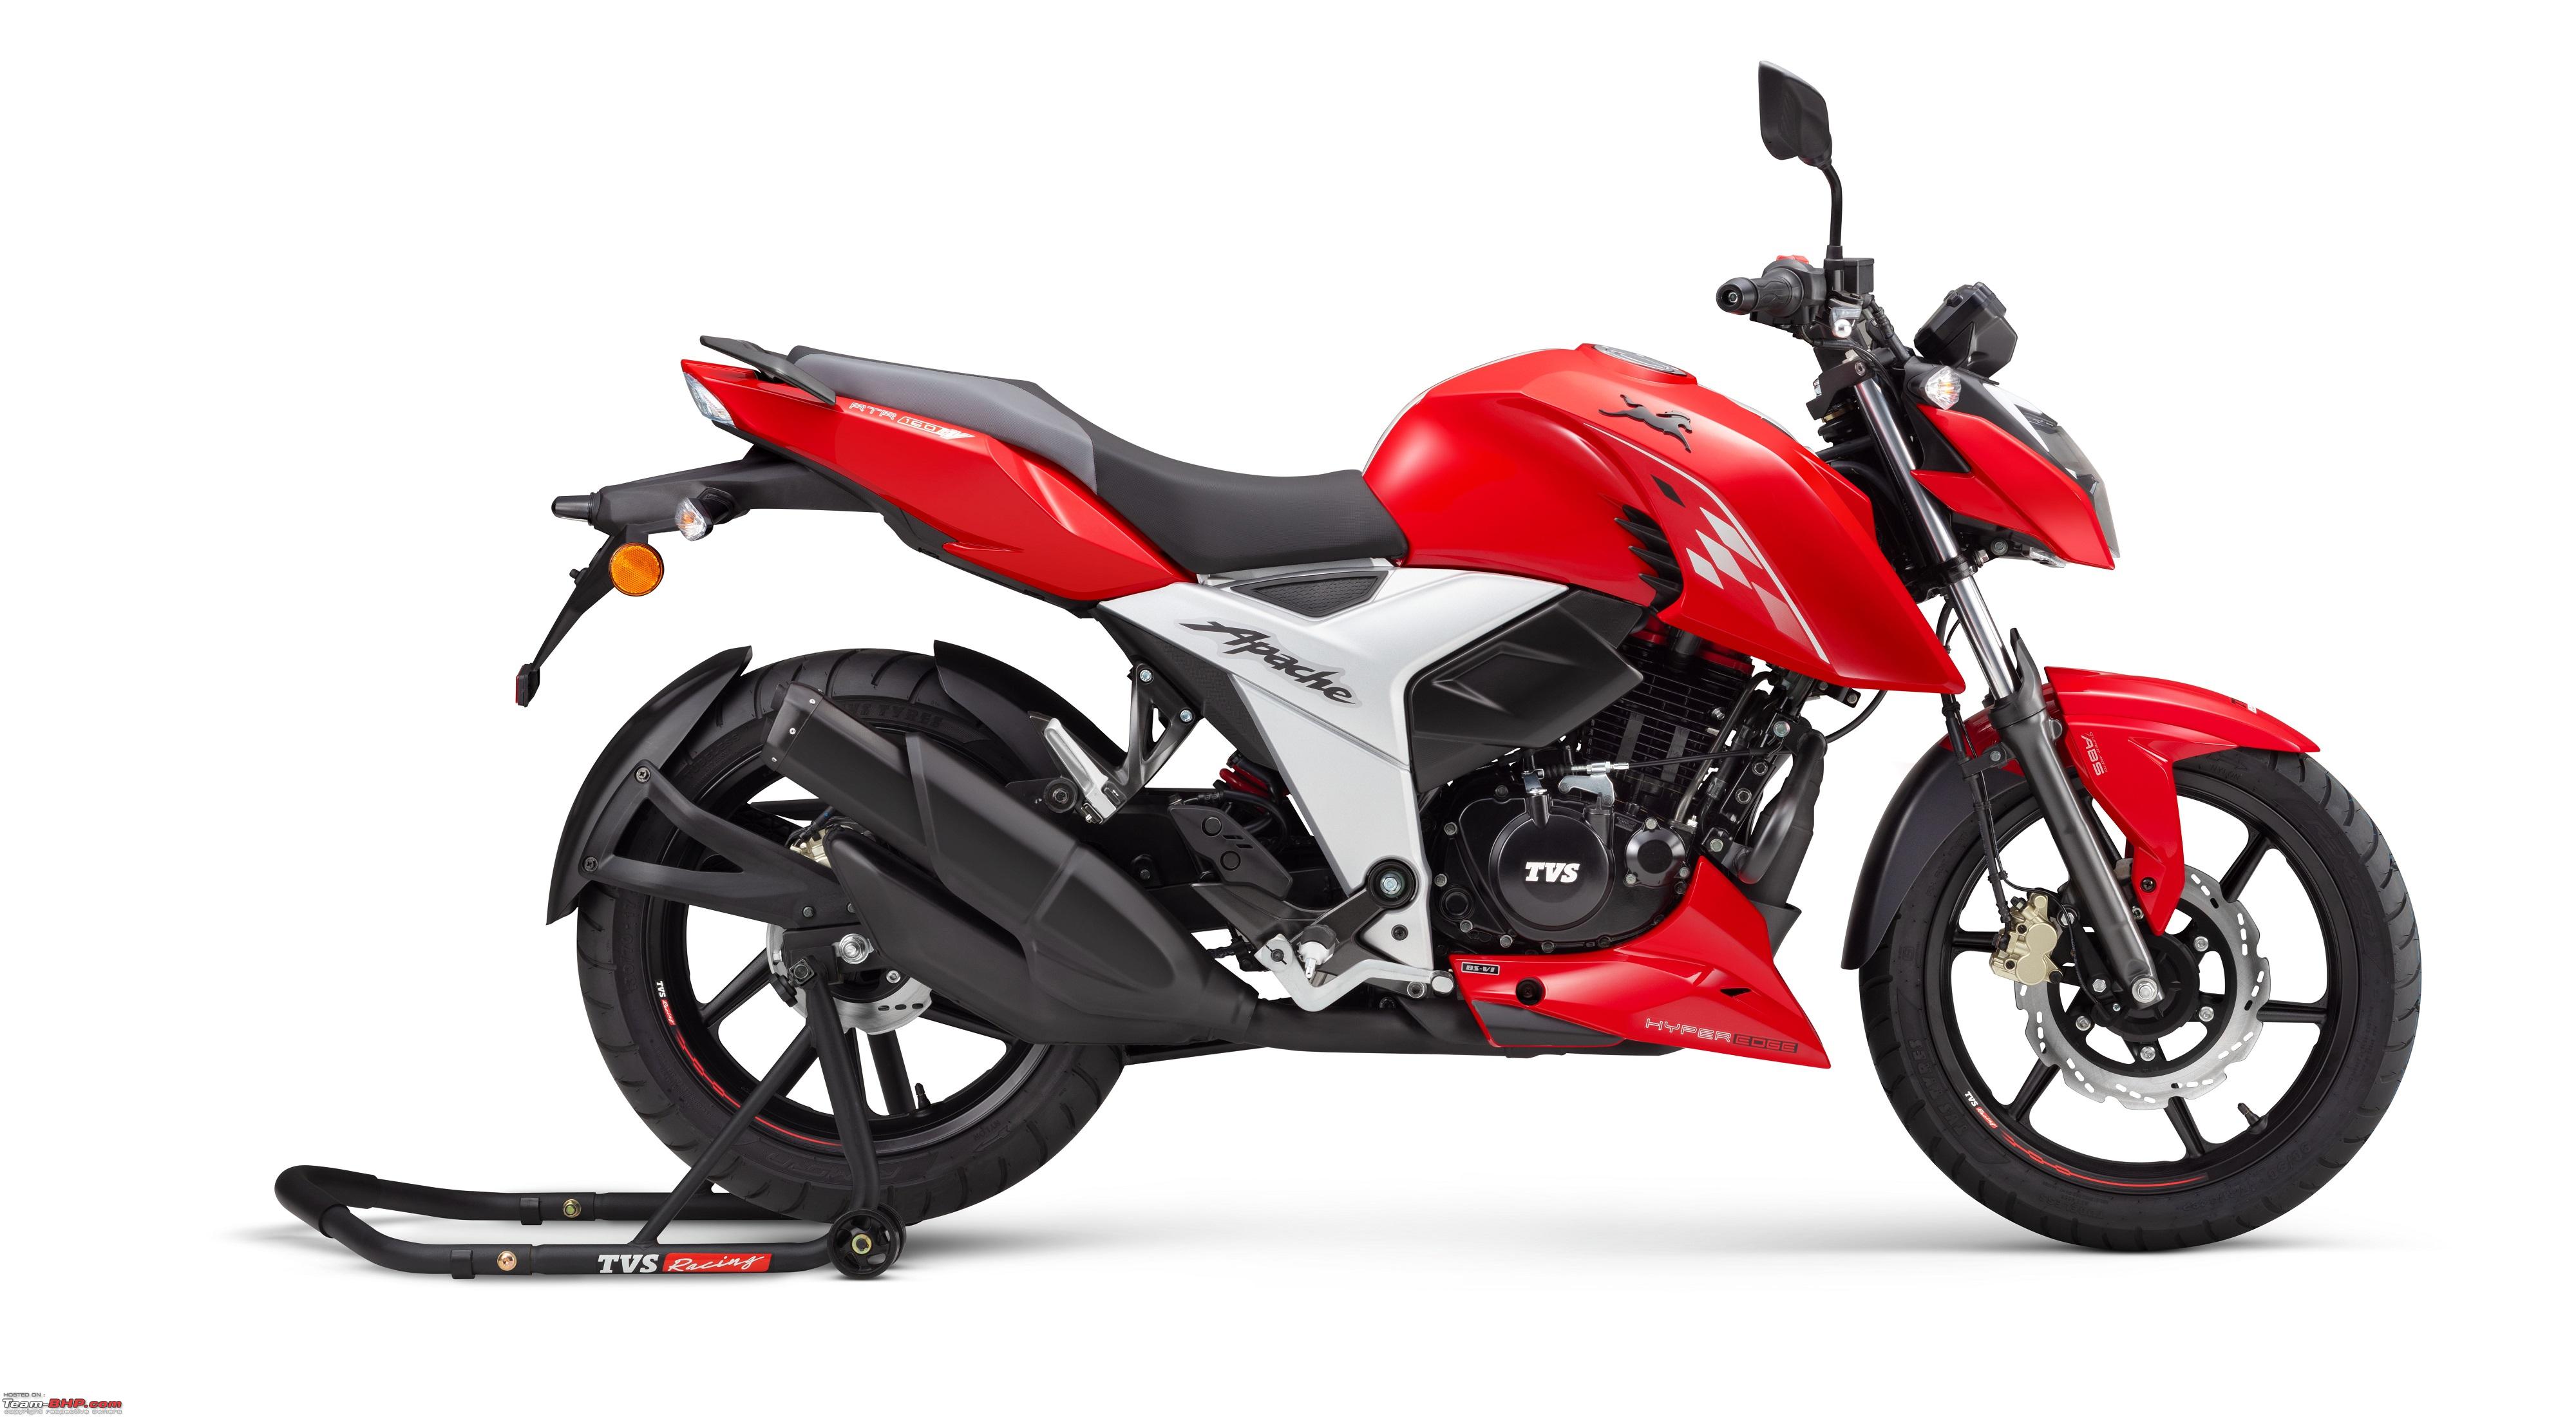 21 Tvs Apache Rtr 160 4v Launched At Rs 1 07 Lakh Team Bhp